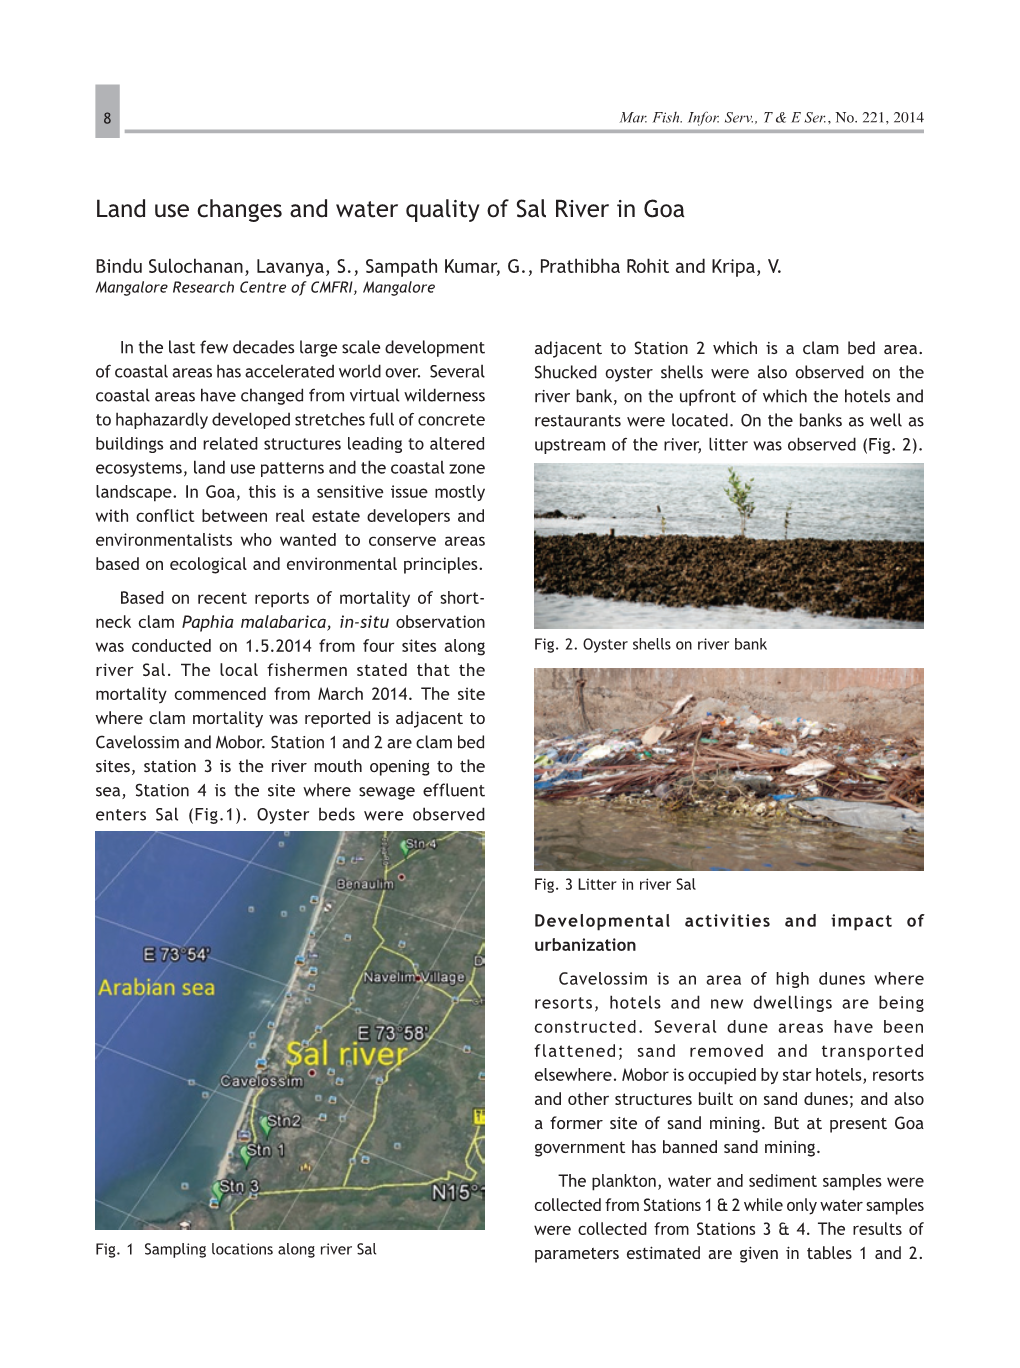 Land Use Changes and Water Quality of Sal River in Goa